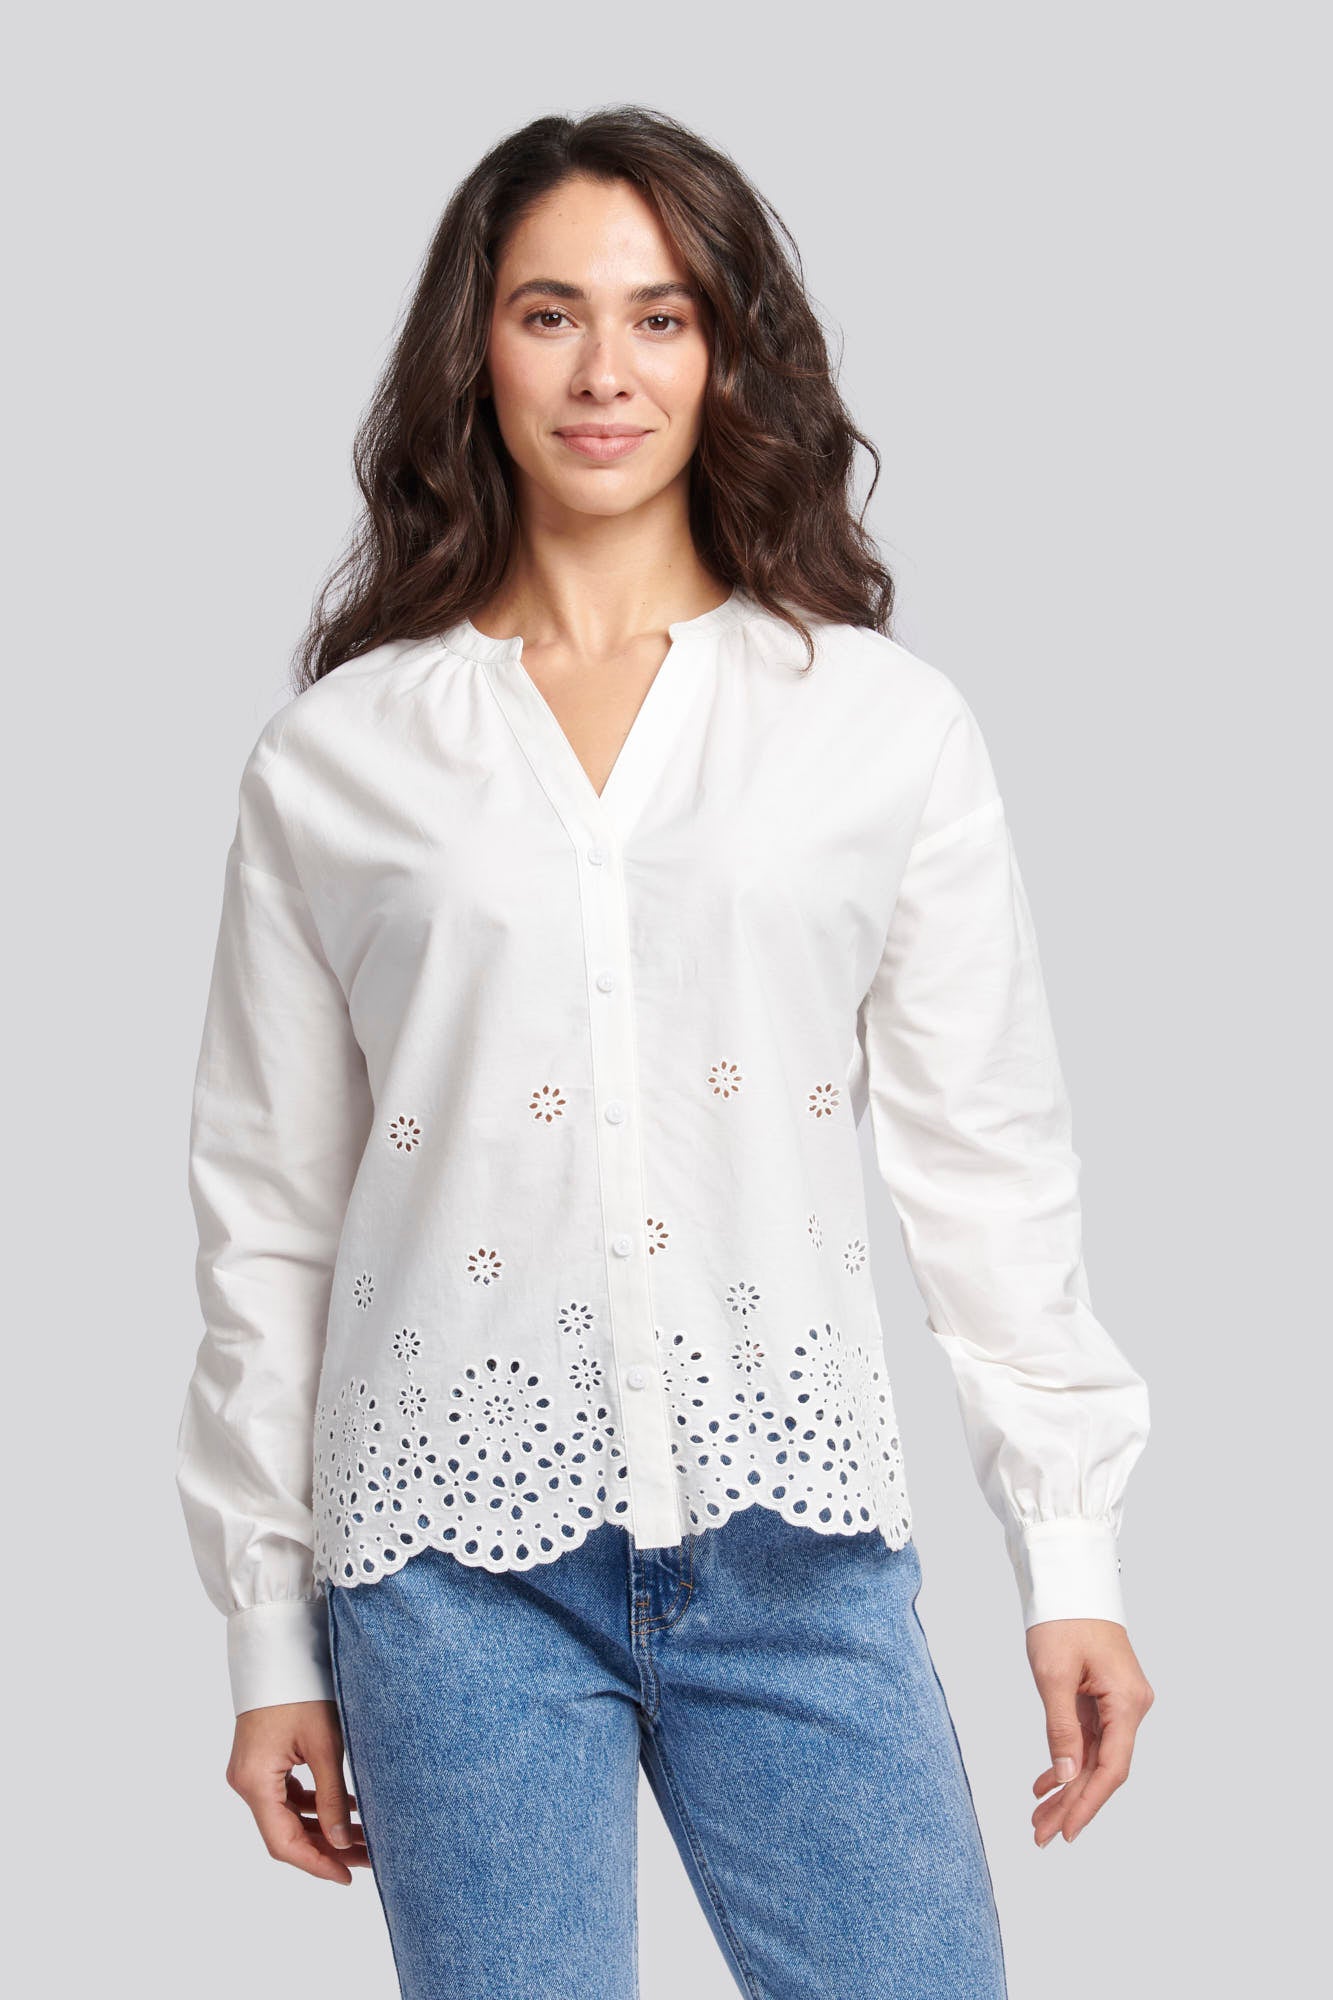 U.S. Polo Assn. Womens Broderie Anglaise Blouse in Bright White